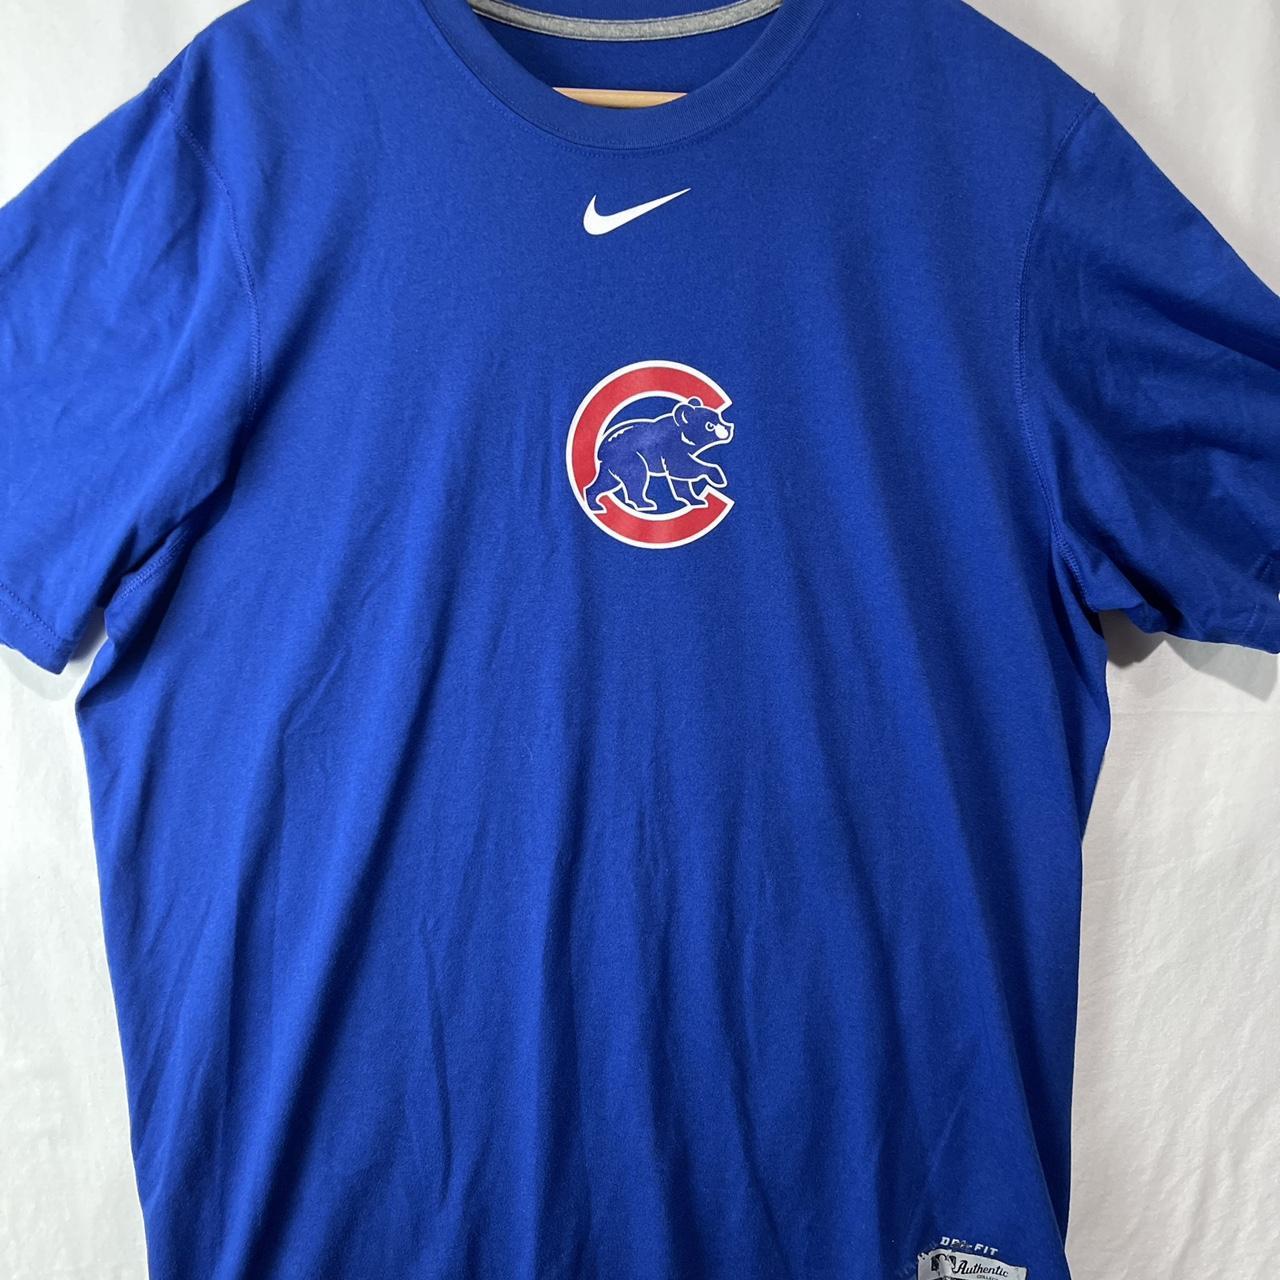 Nike Dri-Fit Early Work (MLB Chicago Cubs) Men's T-Shirt